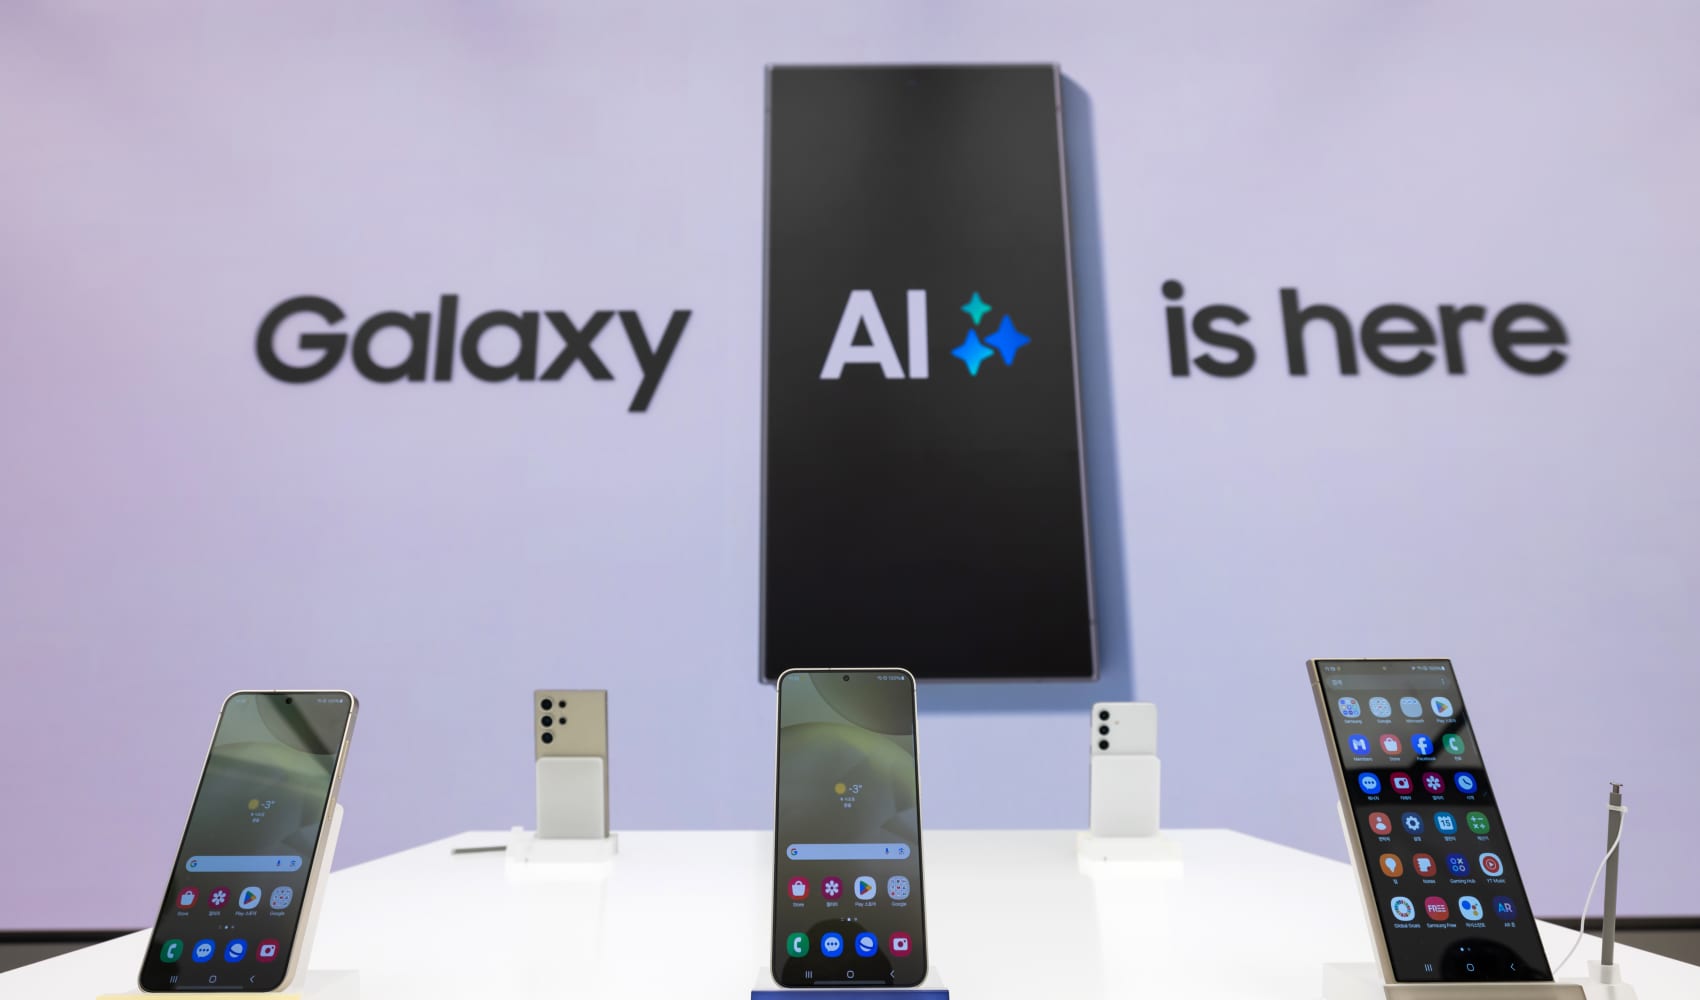 Samsung says it needs to ‘redefine' its voice assistant Bixby with
generative AI upgrade